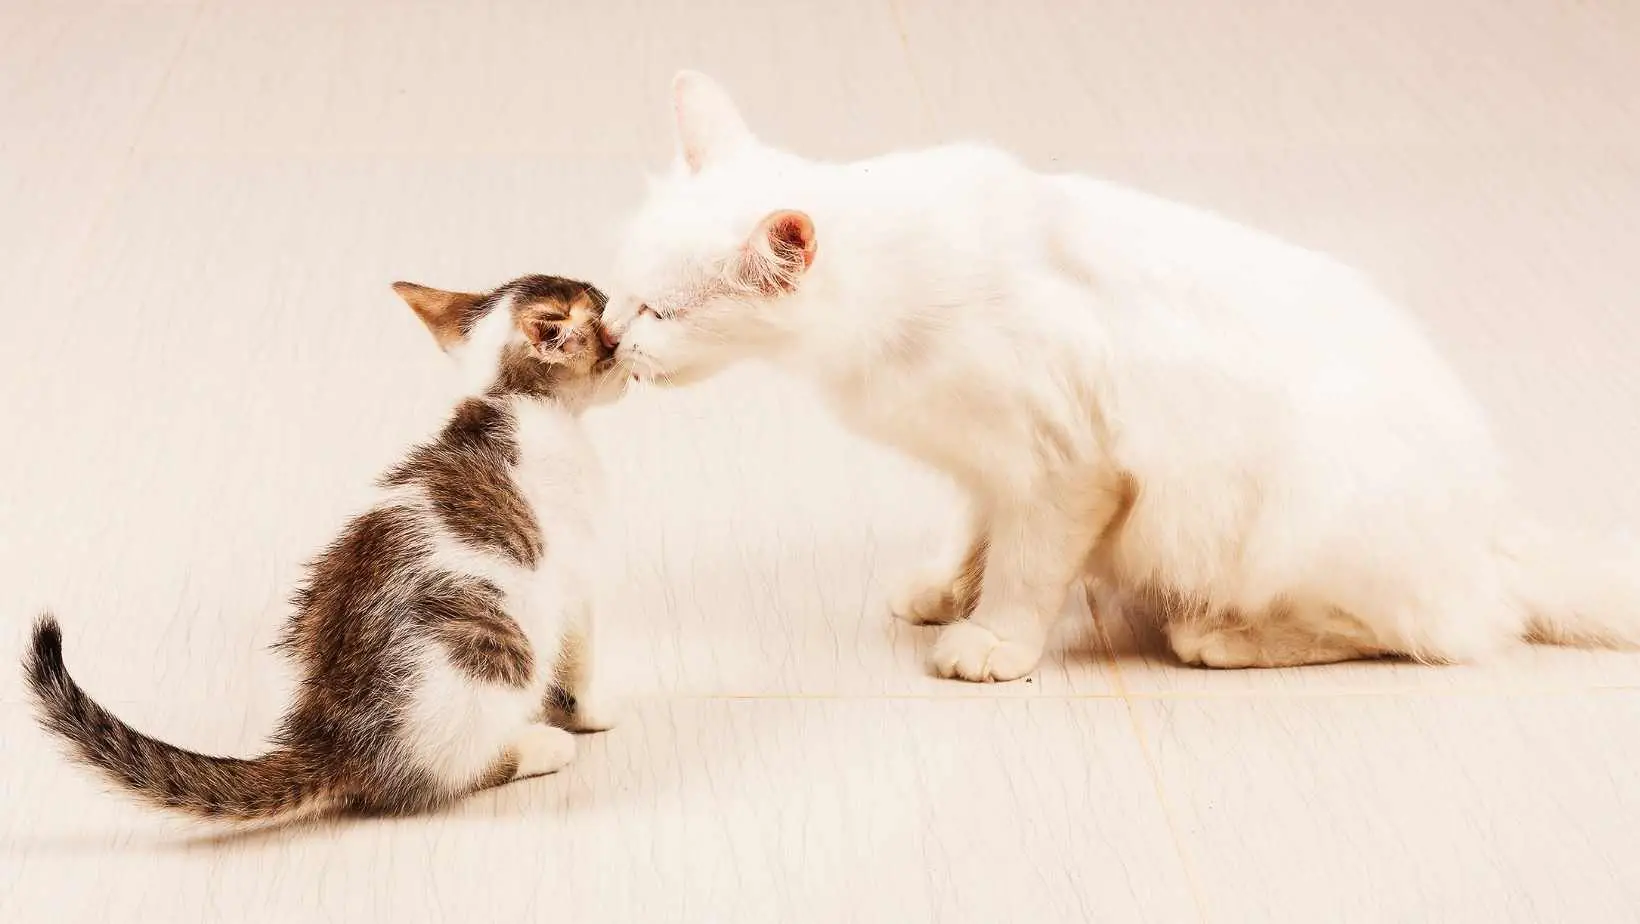 How to Introduce a Kitten to an Older Cat?